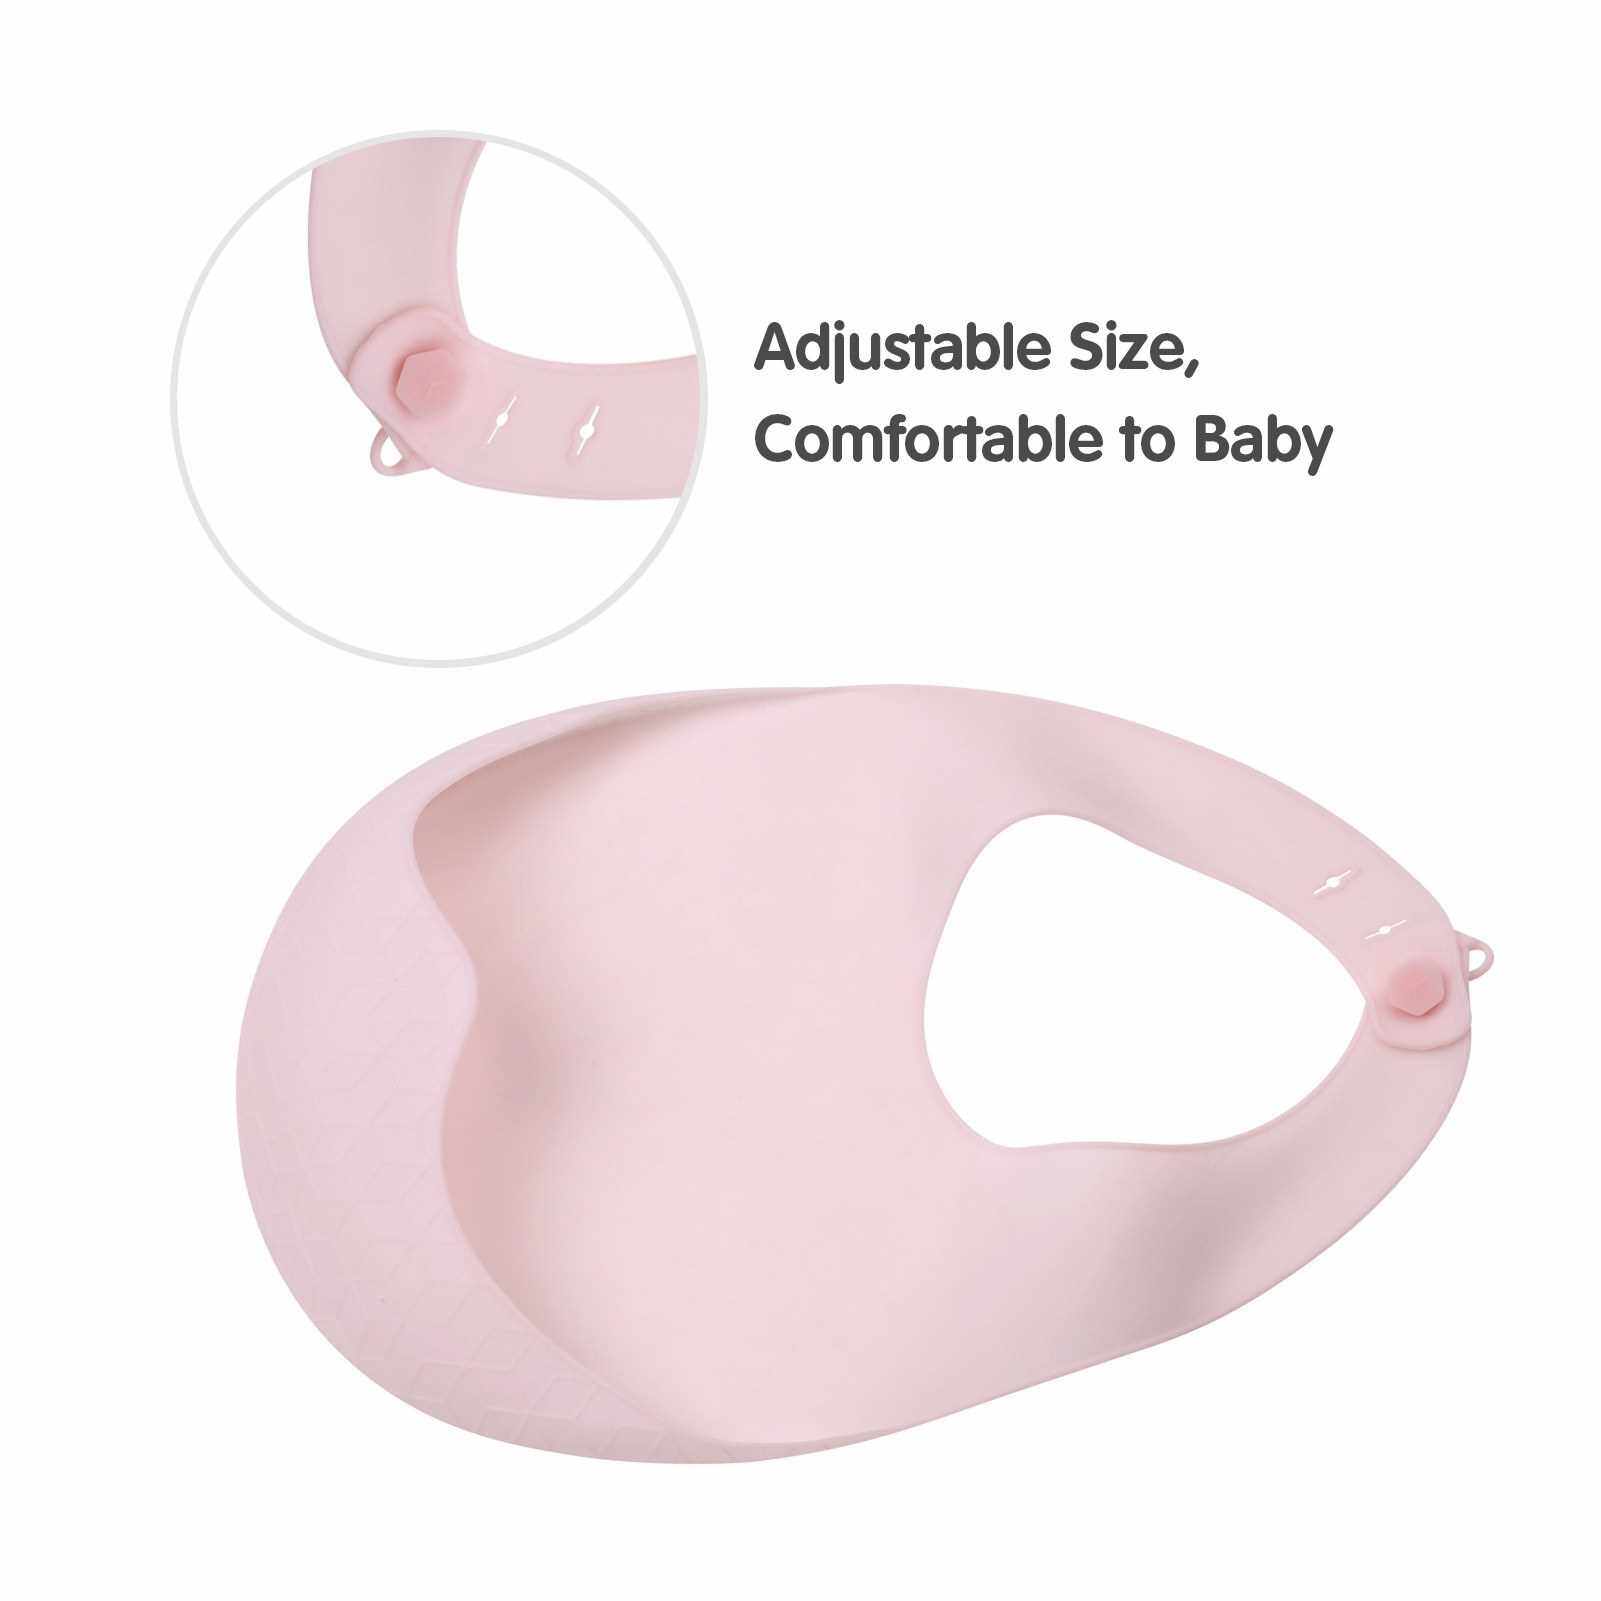 BEST SELLER Baby Silicone Bibs Set of 2 Adjustable Extra Thin Baby Feeding Bibs Waterproof Soft Drooling Bibs for Home Life Travel Gift for Infants Toddlers (Pgr)